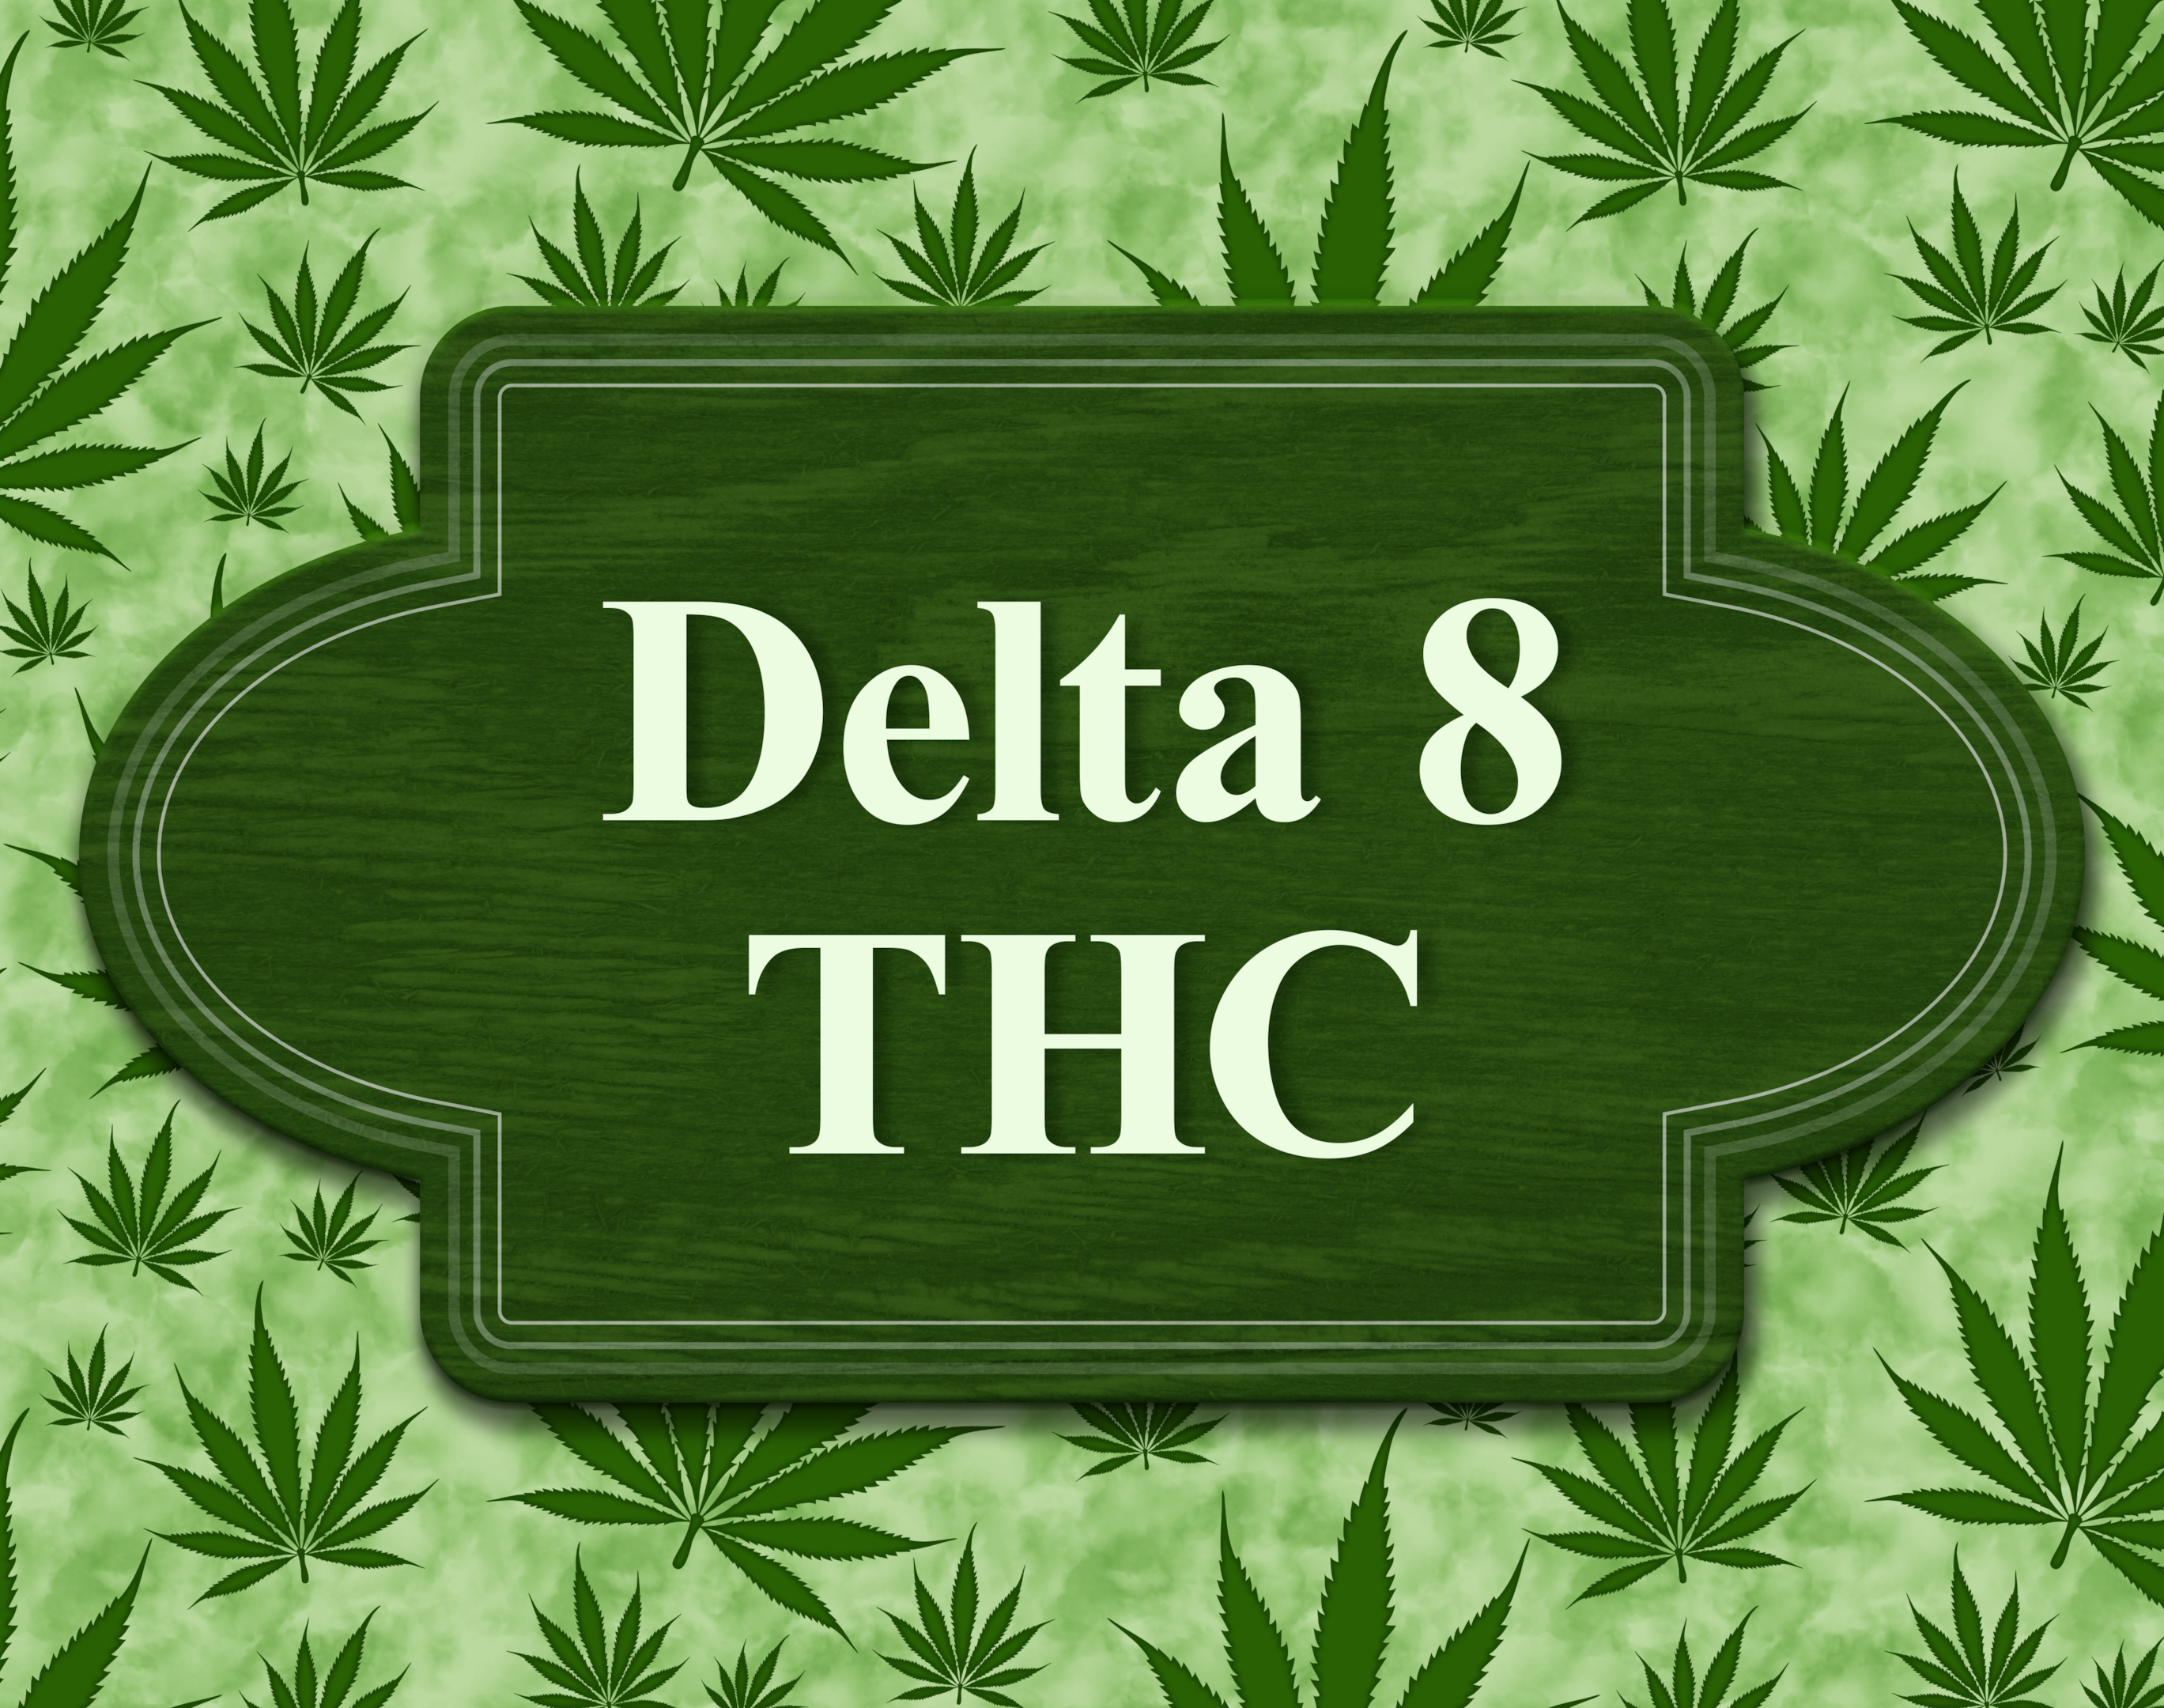 Although we cannot make claims around Delta 8 THC or Delta 9 THC and chronic pain or medical use, some people might try to get medical authorization to add Delta 8 THC or Delta 9 THC to their routine.